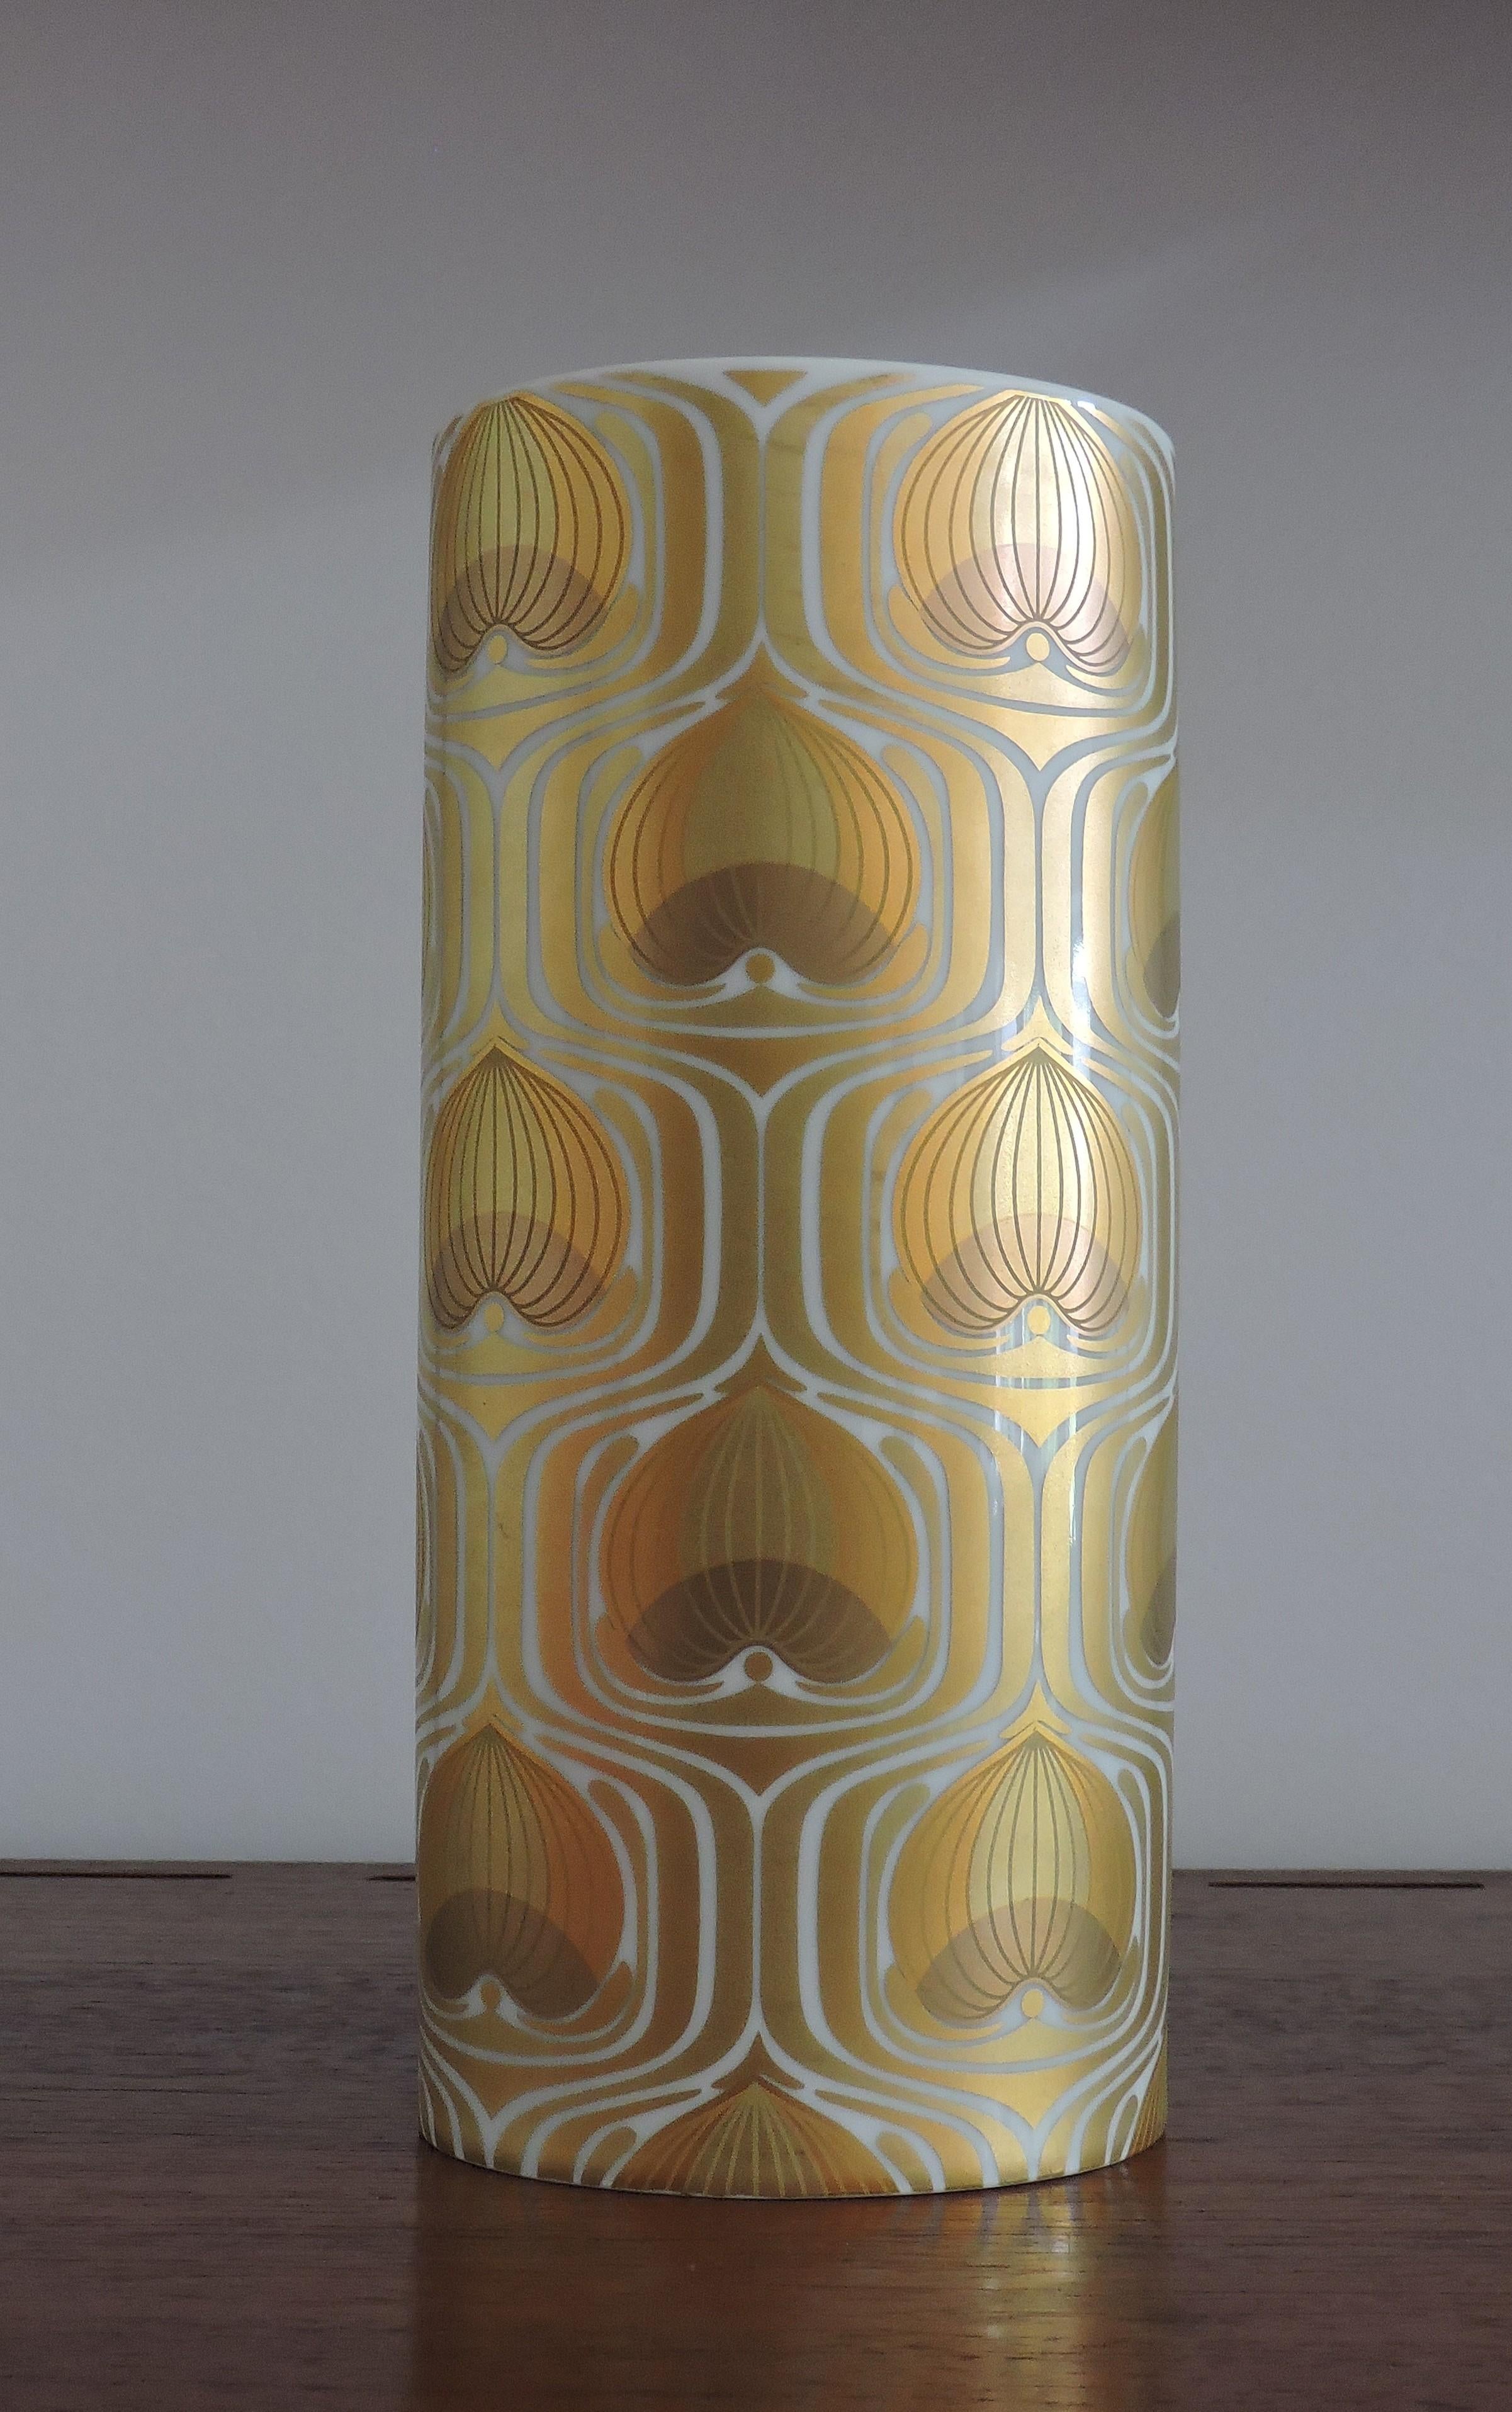 Beautiful and large 9 1/2 inch tall vase designed by Born Wiinblad for Rosenthal and manufactured in Germany. This cylindrical vase has an intricate gold pattern on white porcelain.